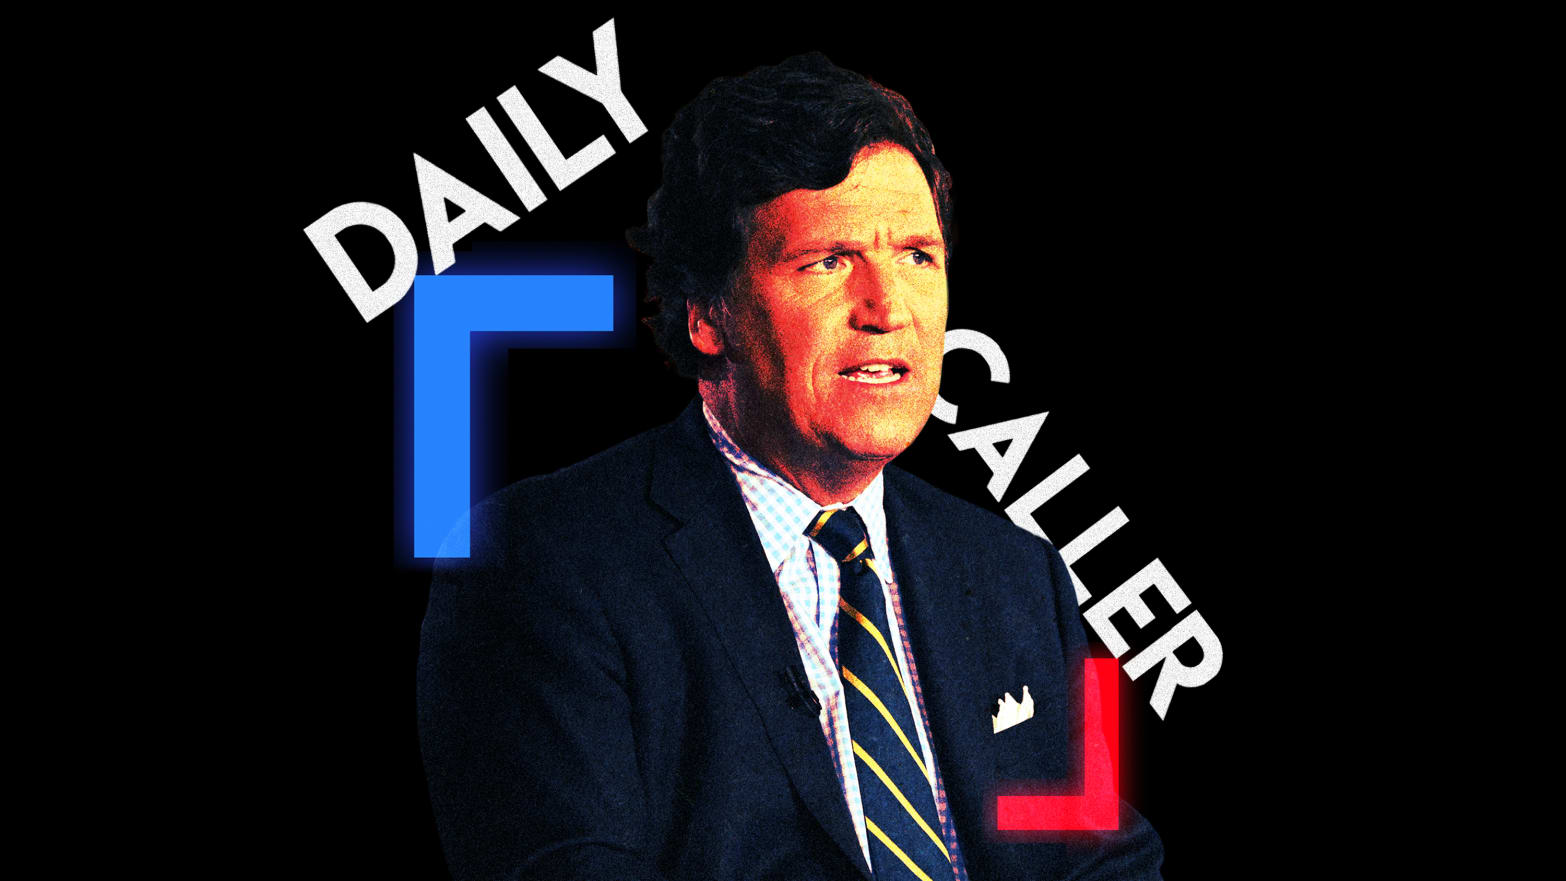 Tax Docs Reveal Tucker Carlson Is Finally, Truly Out at The Daily Choler (thedailybeast.com)